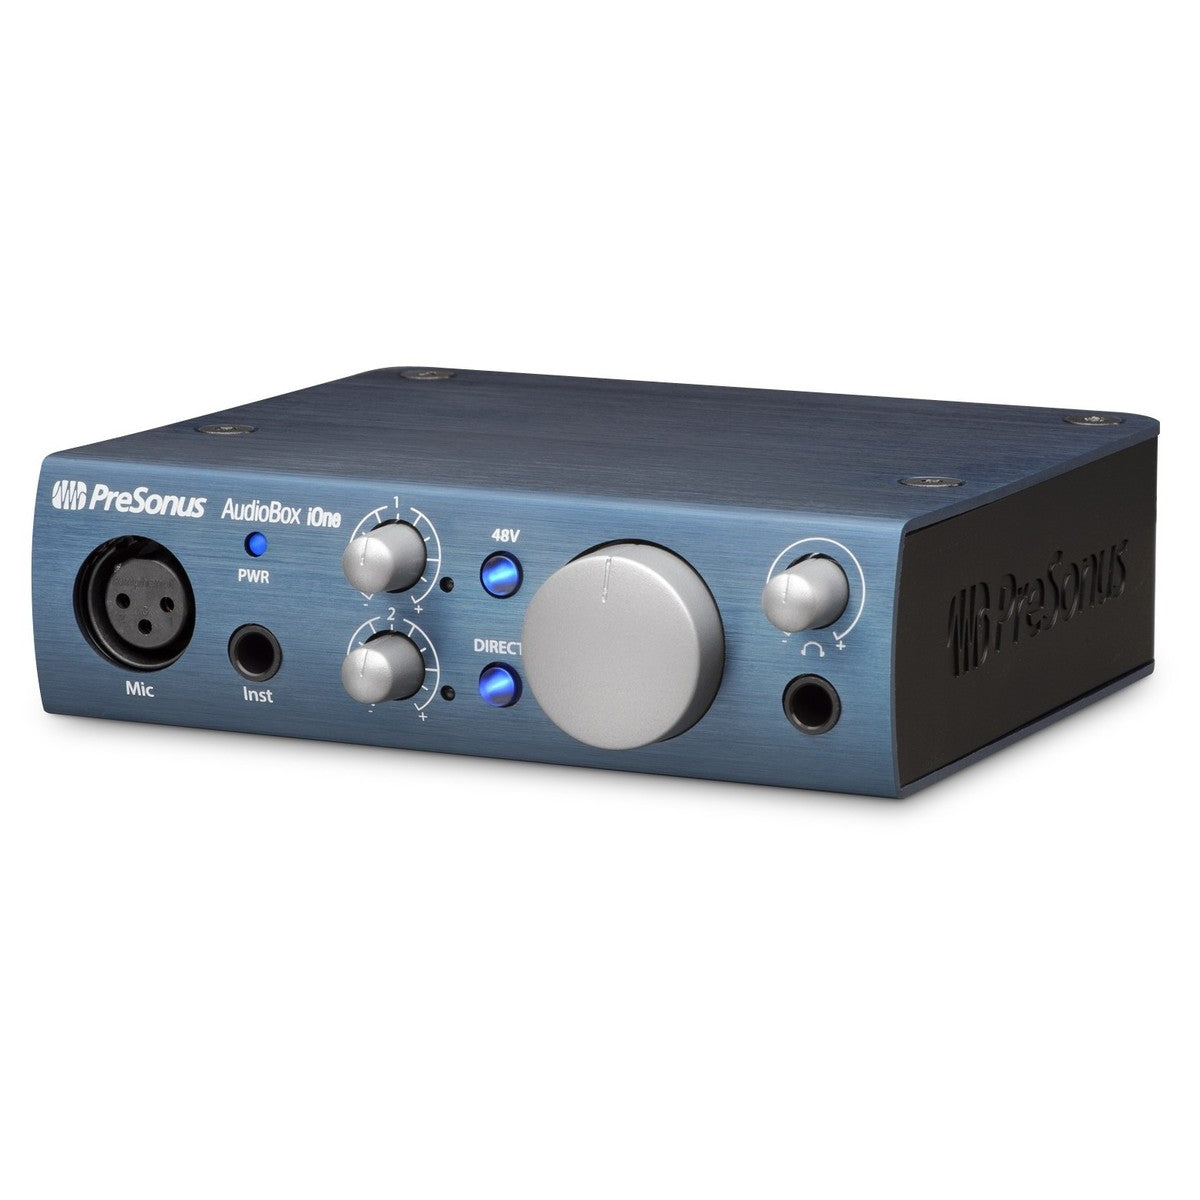 PreSonus AudioBox iOne: The USB/iPad Audio Interface for Guitarists and Songwriters